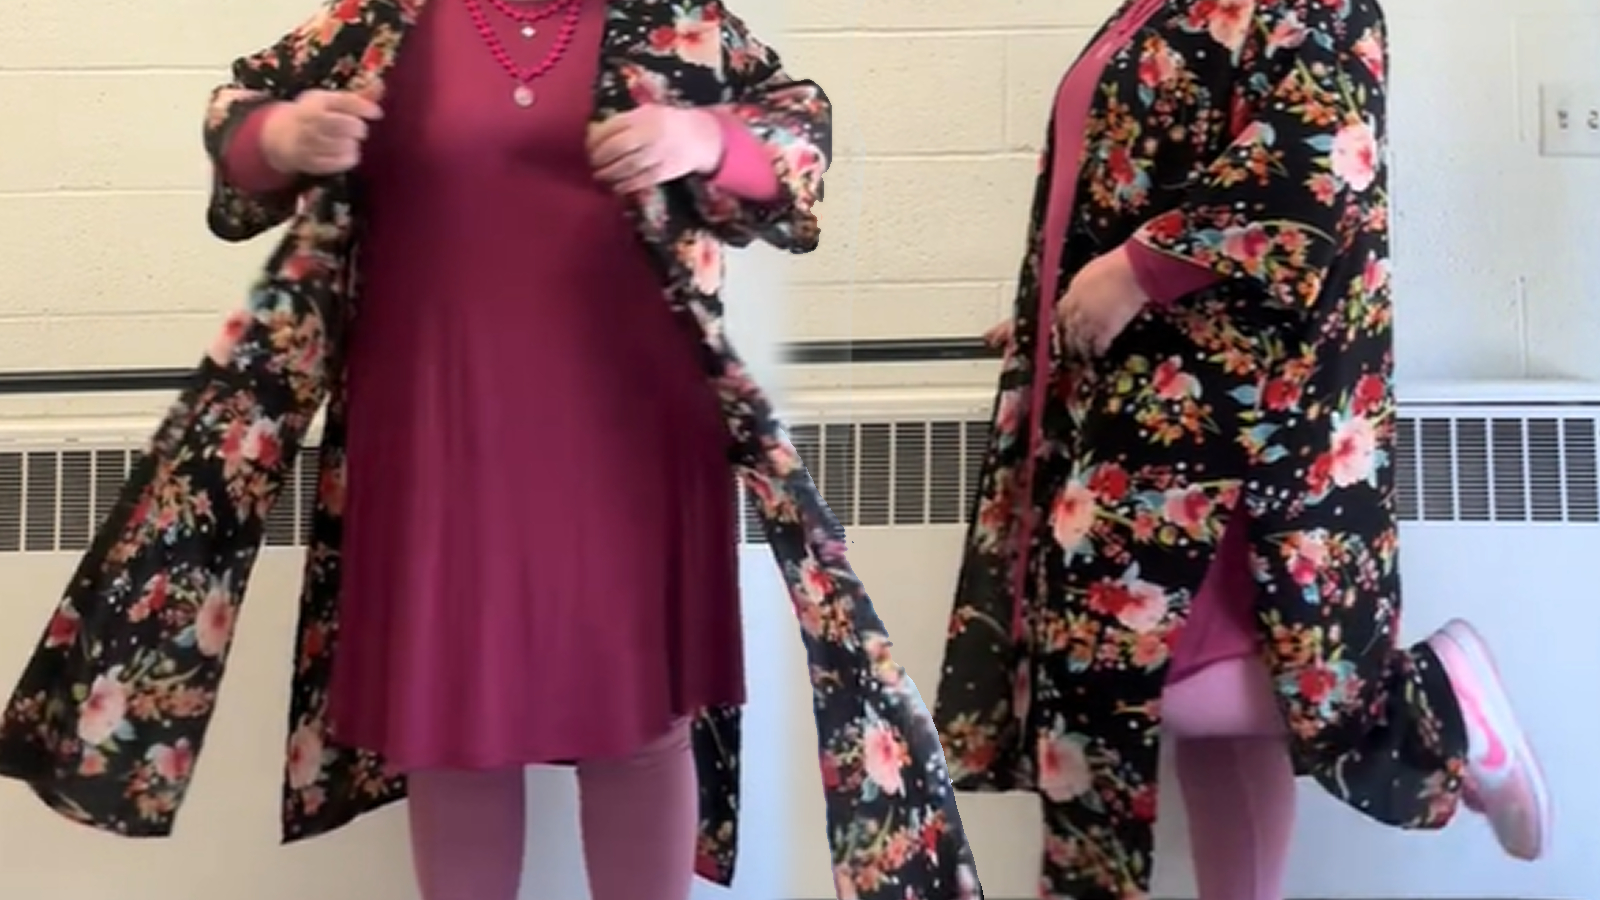 Teachers accused of bullying principal after tricking her into dressing up